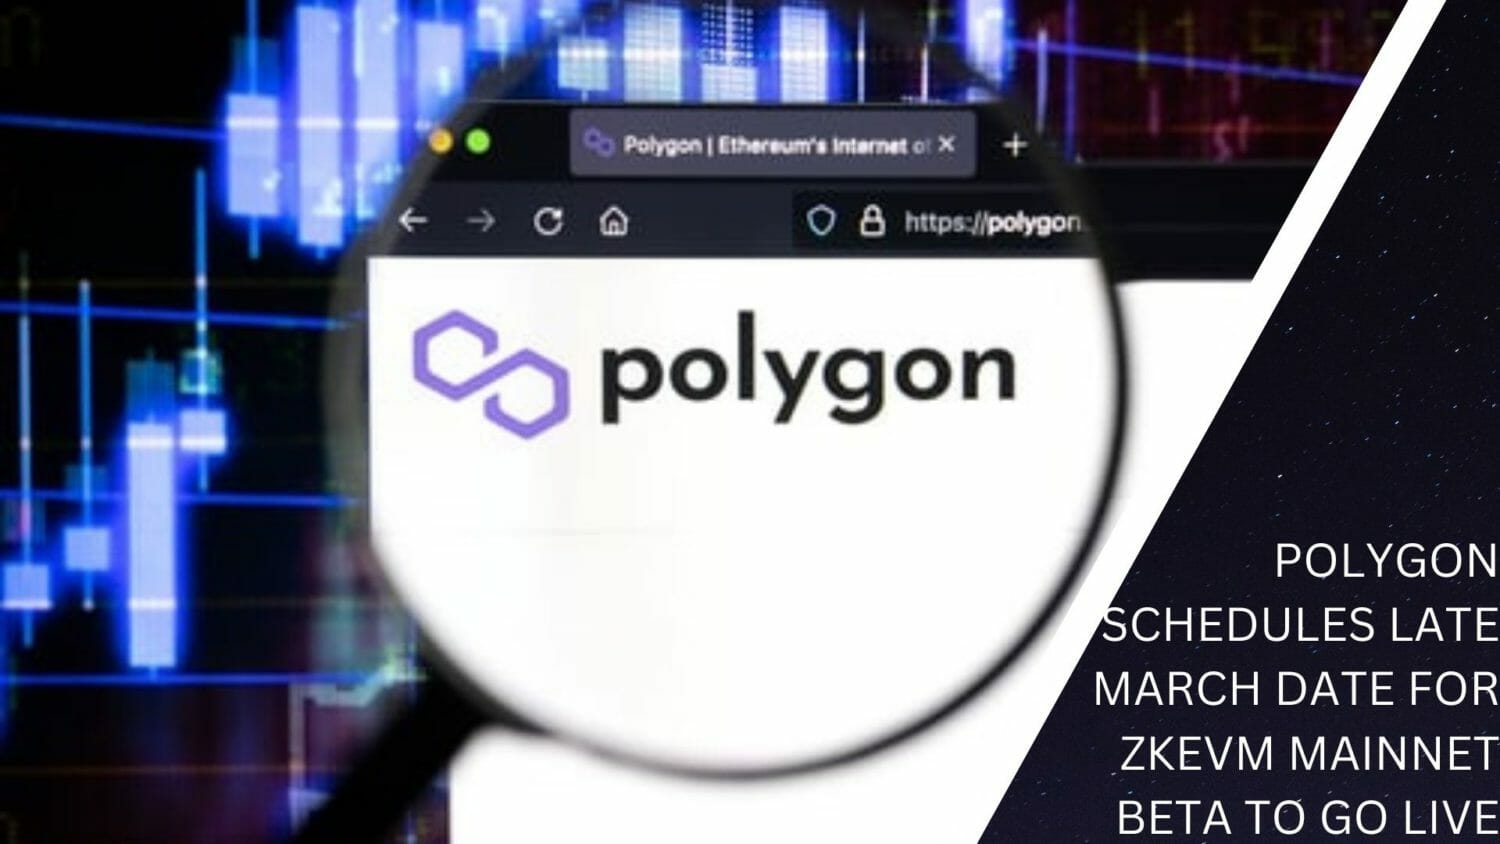 Polygon Schedules Late March Date For Zkevm Mainnet Beta To Go Live